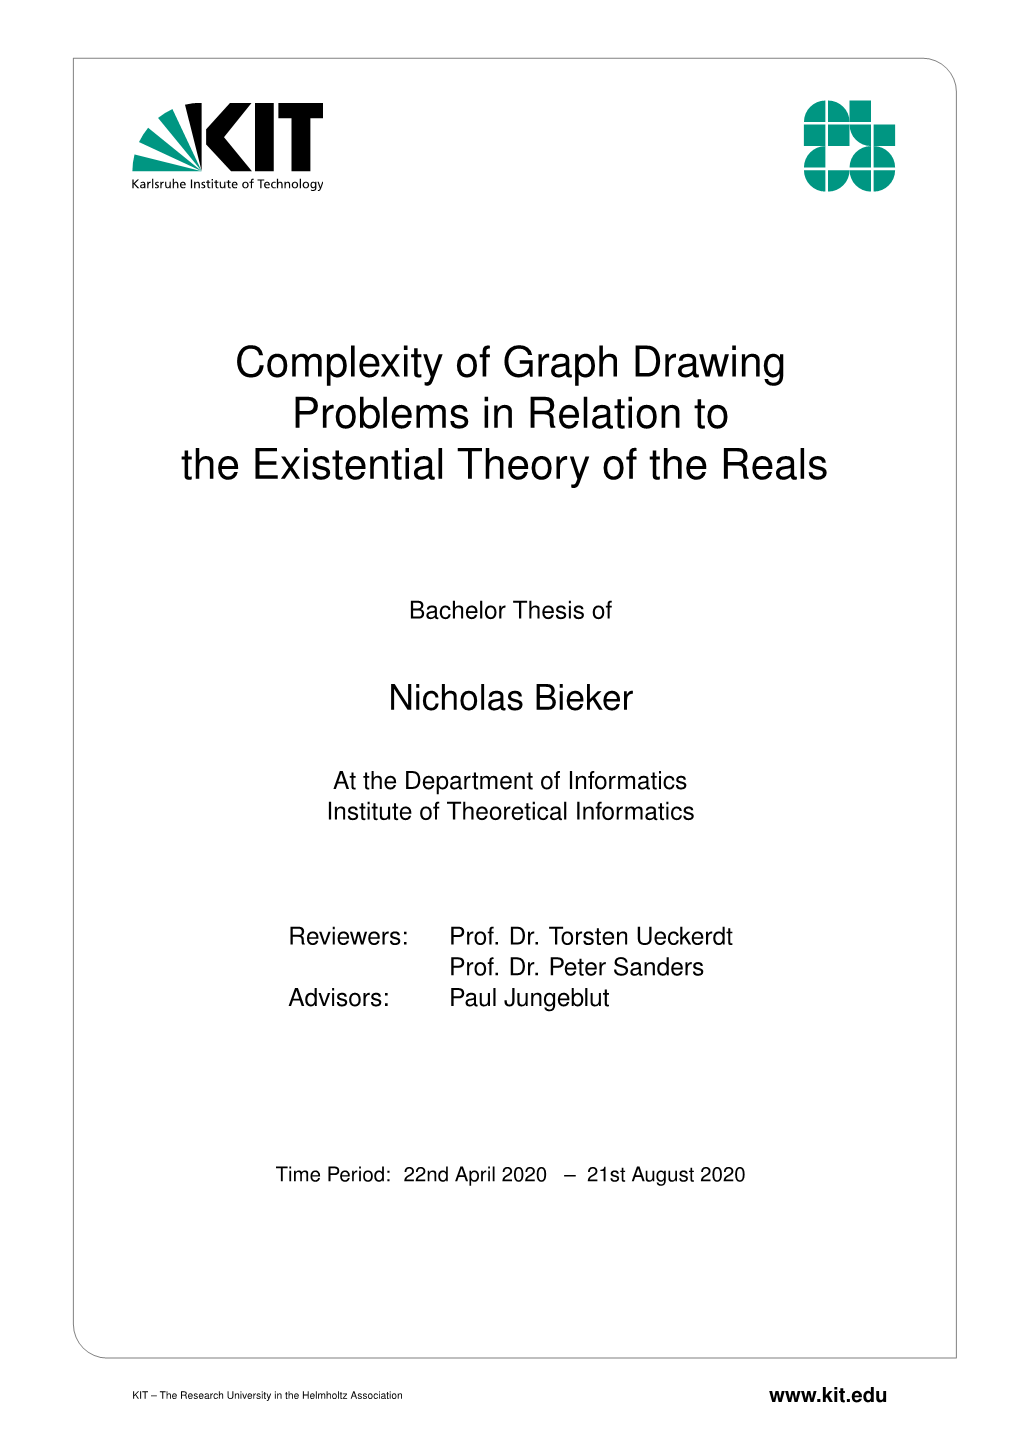 Complexity of Graph Drawing Problems in Relation to the Existential Theory of the Reals